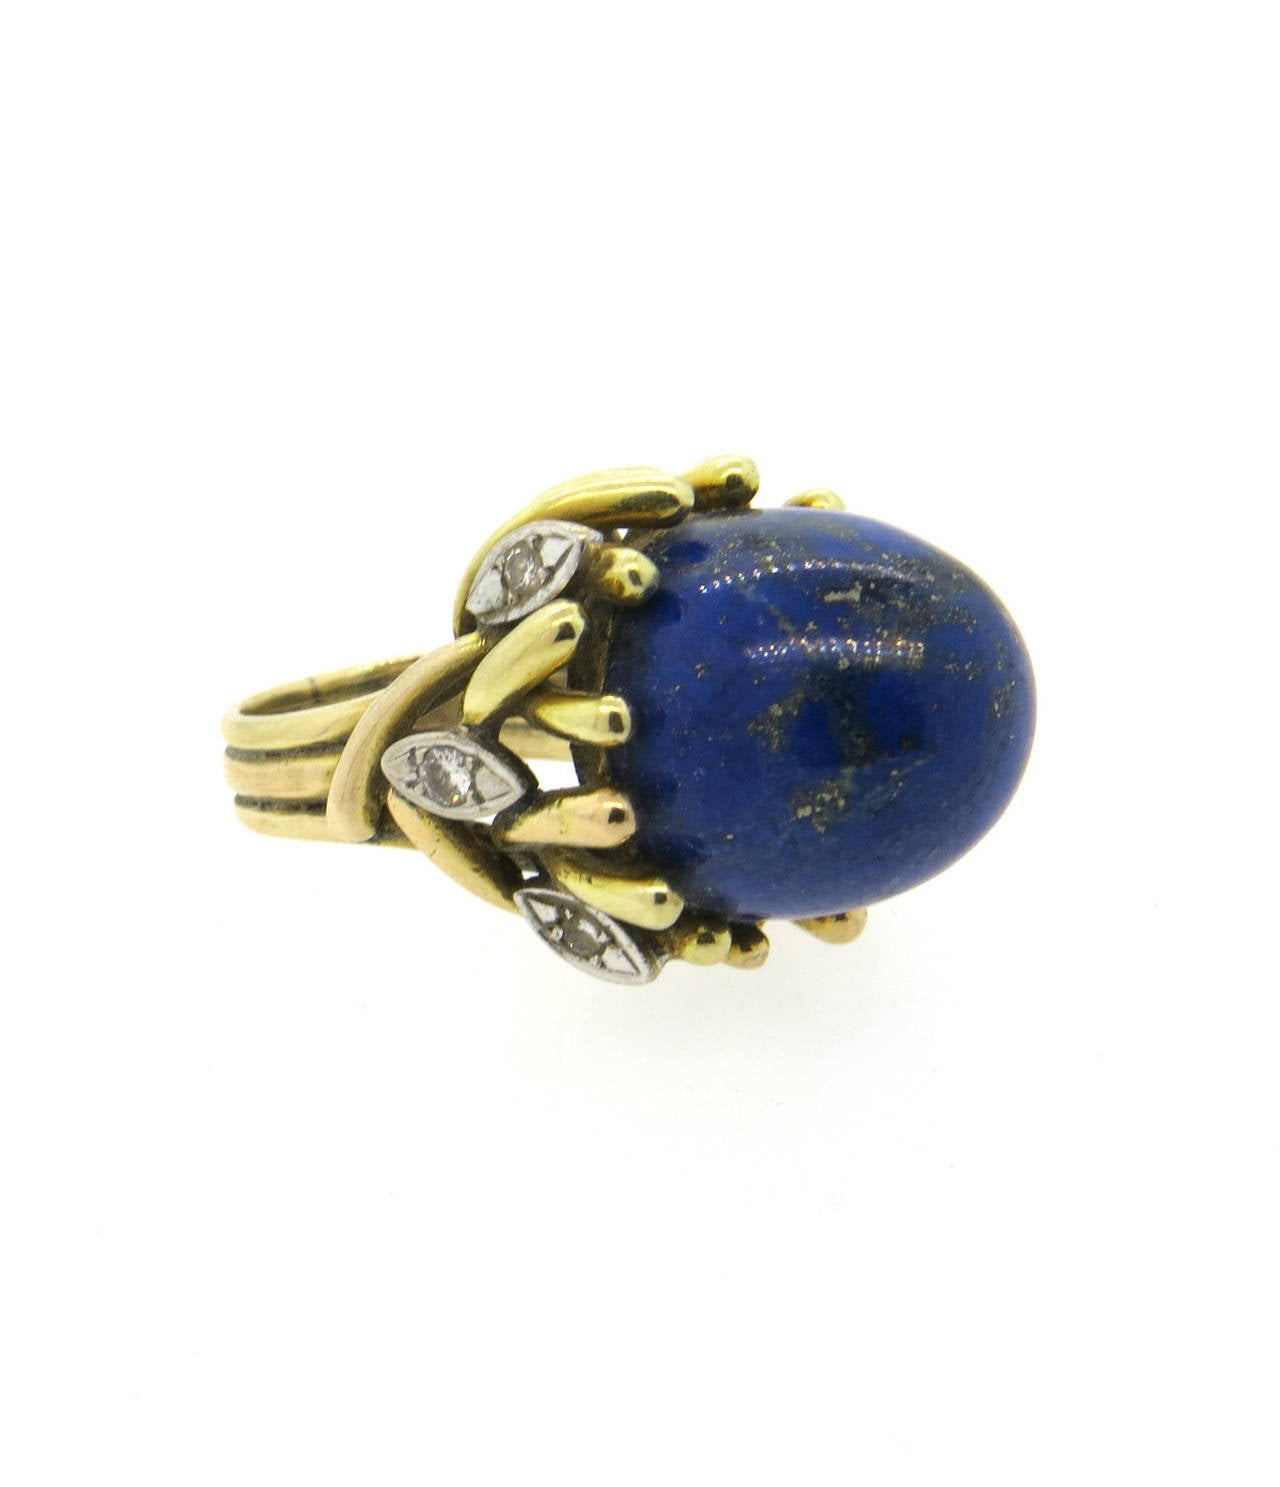 Impressive 18K gold cocktail ring circa 1960s featuring lapis and decorated with diamonds. Ring size 5.5, top measures 24mm in diameter. Ring sits approximately 22.5m from finger. Weight - 22.8 grams.